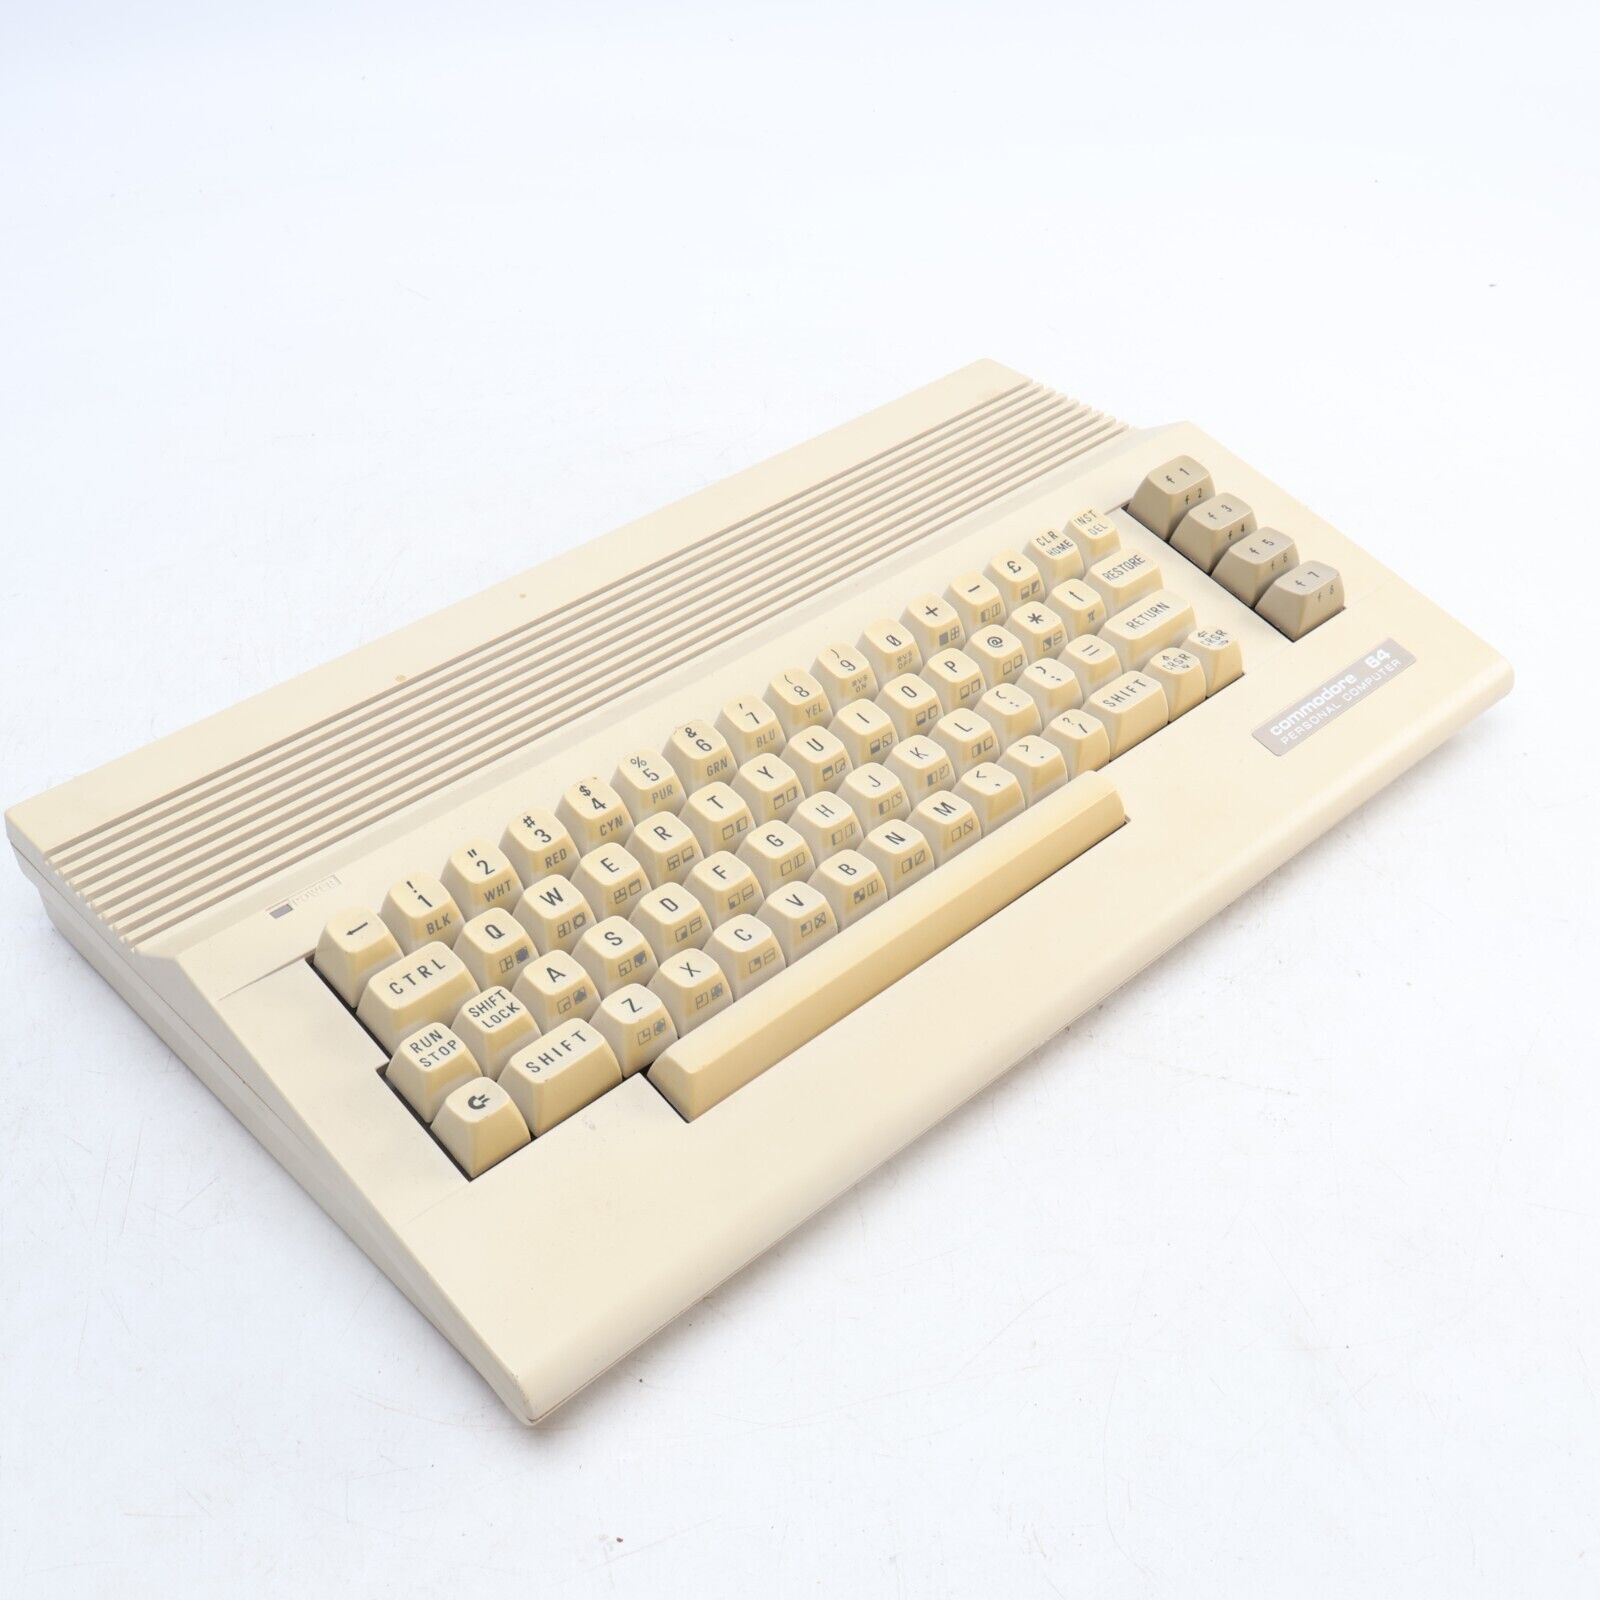 Commodore 64 C64C Computer - FULLY WORKING -